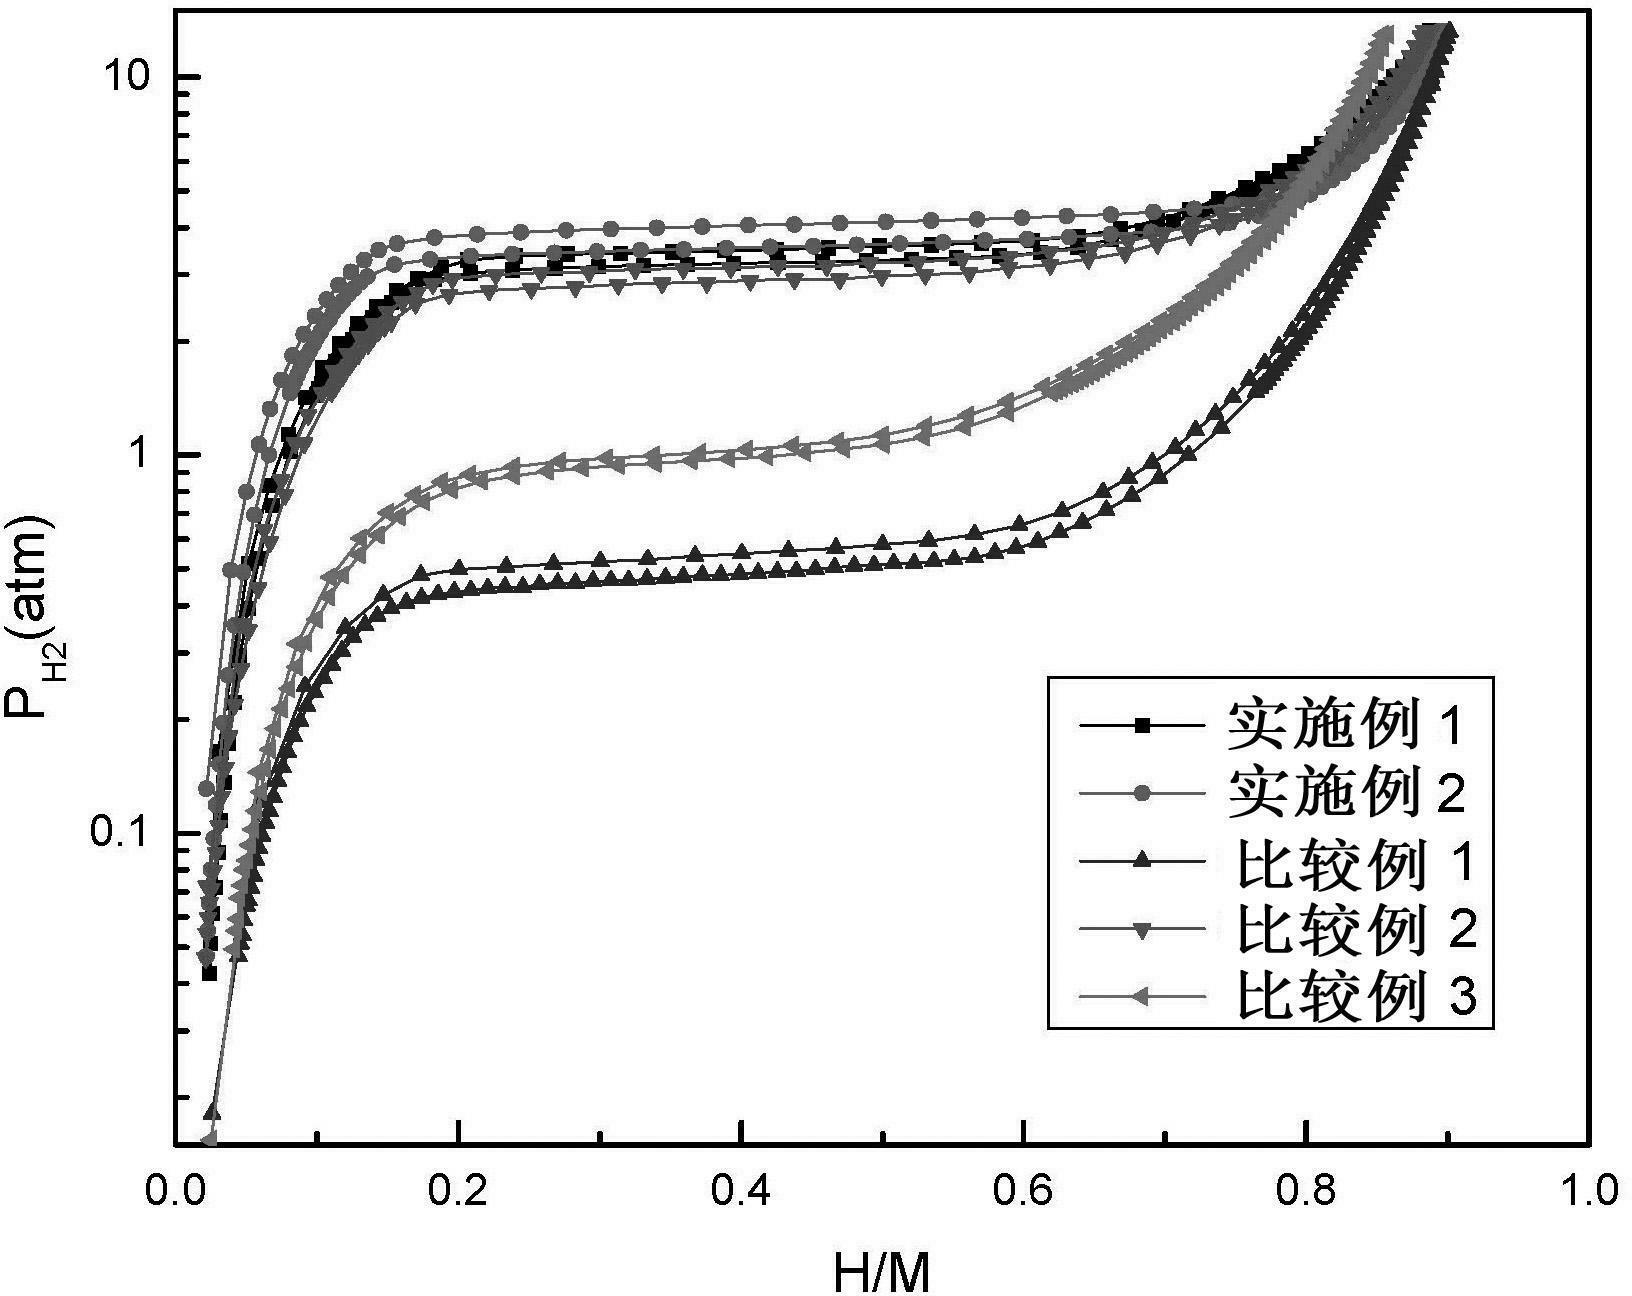 Low temperature power type hydrogen storage alloy for nickel-metal hydride battery